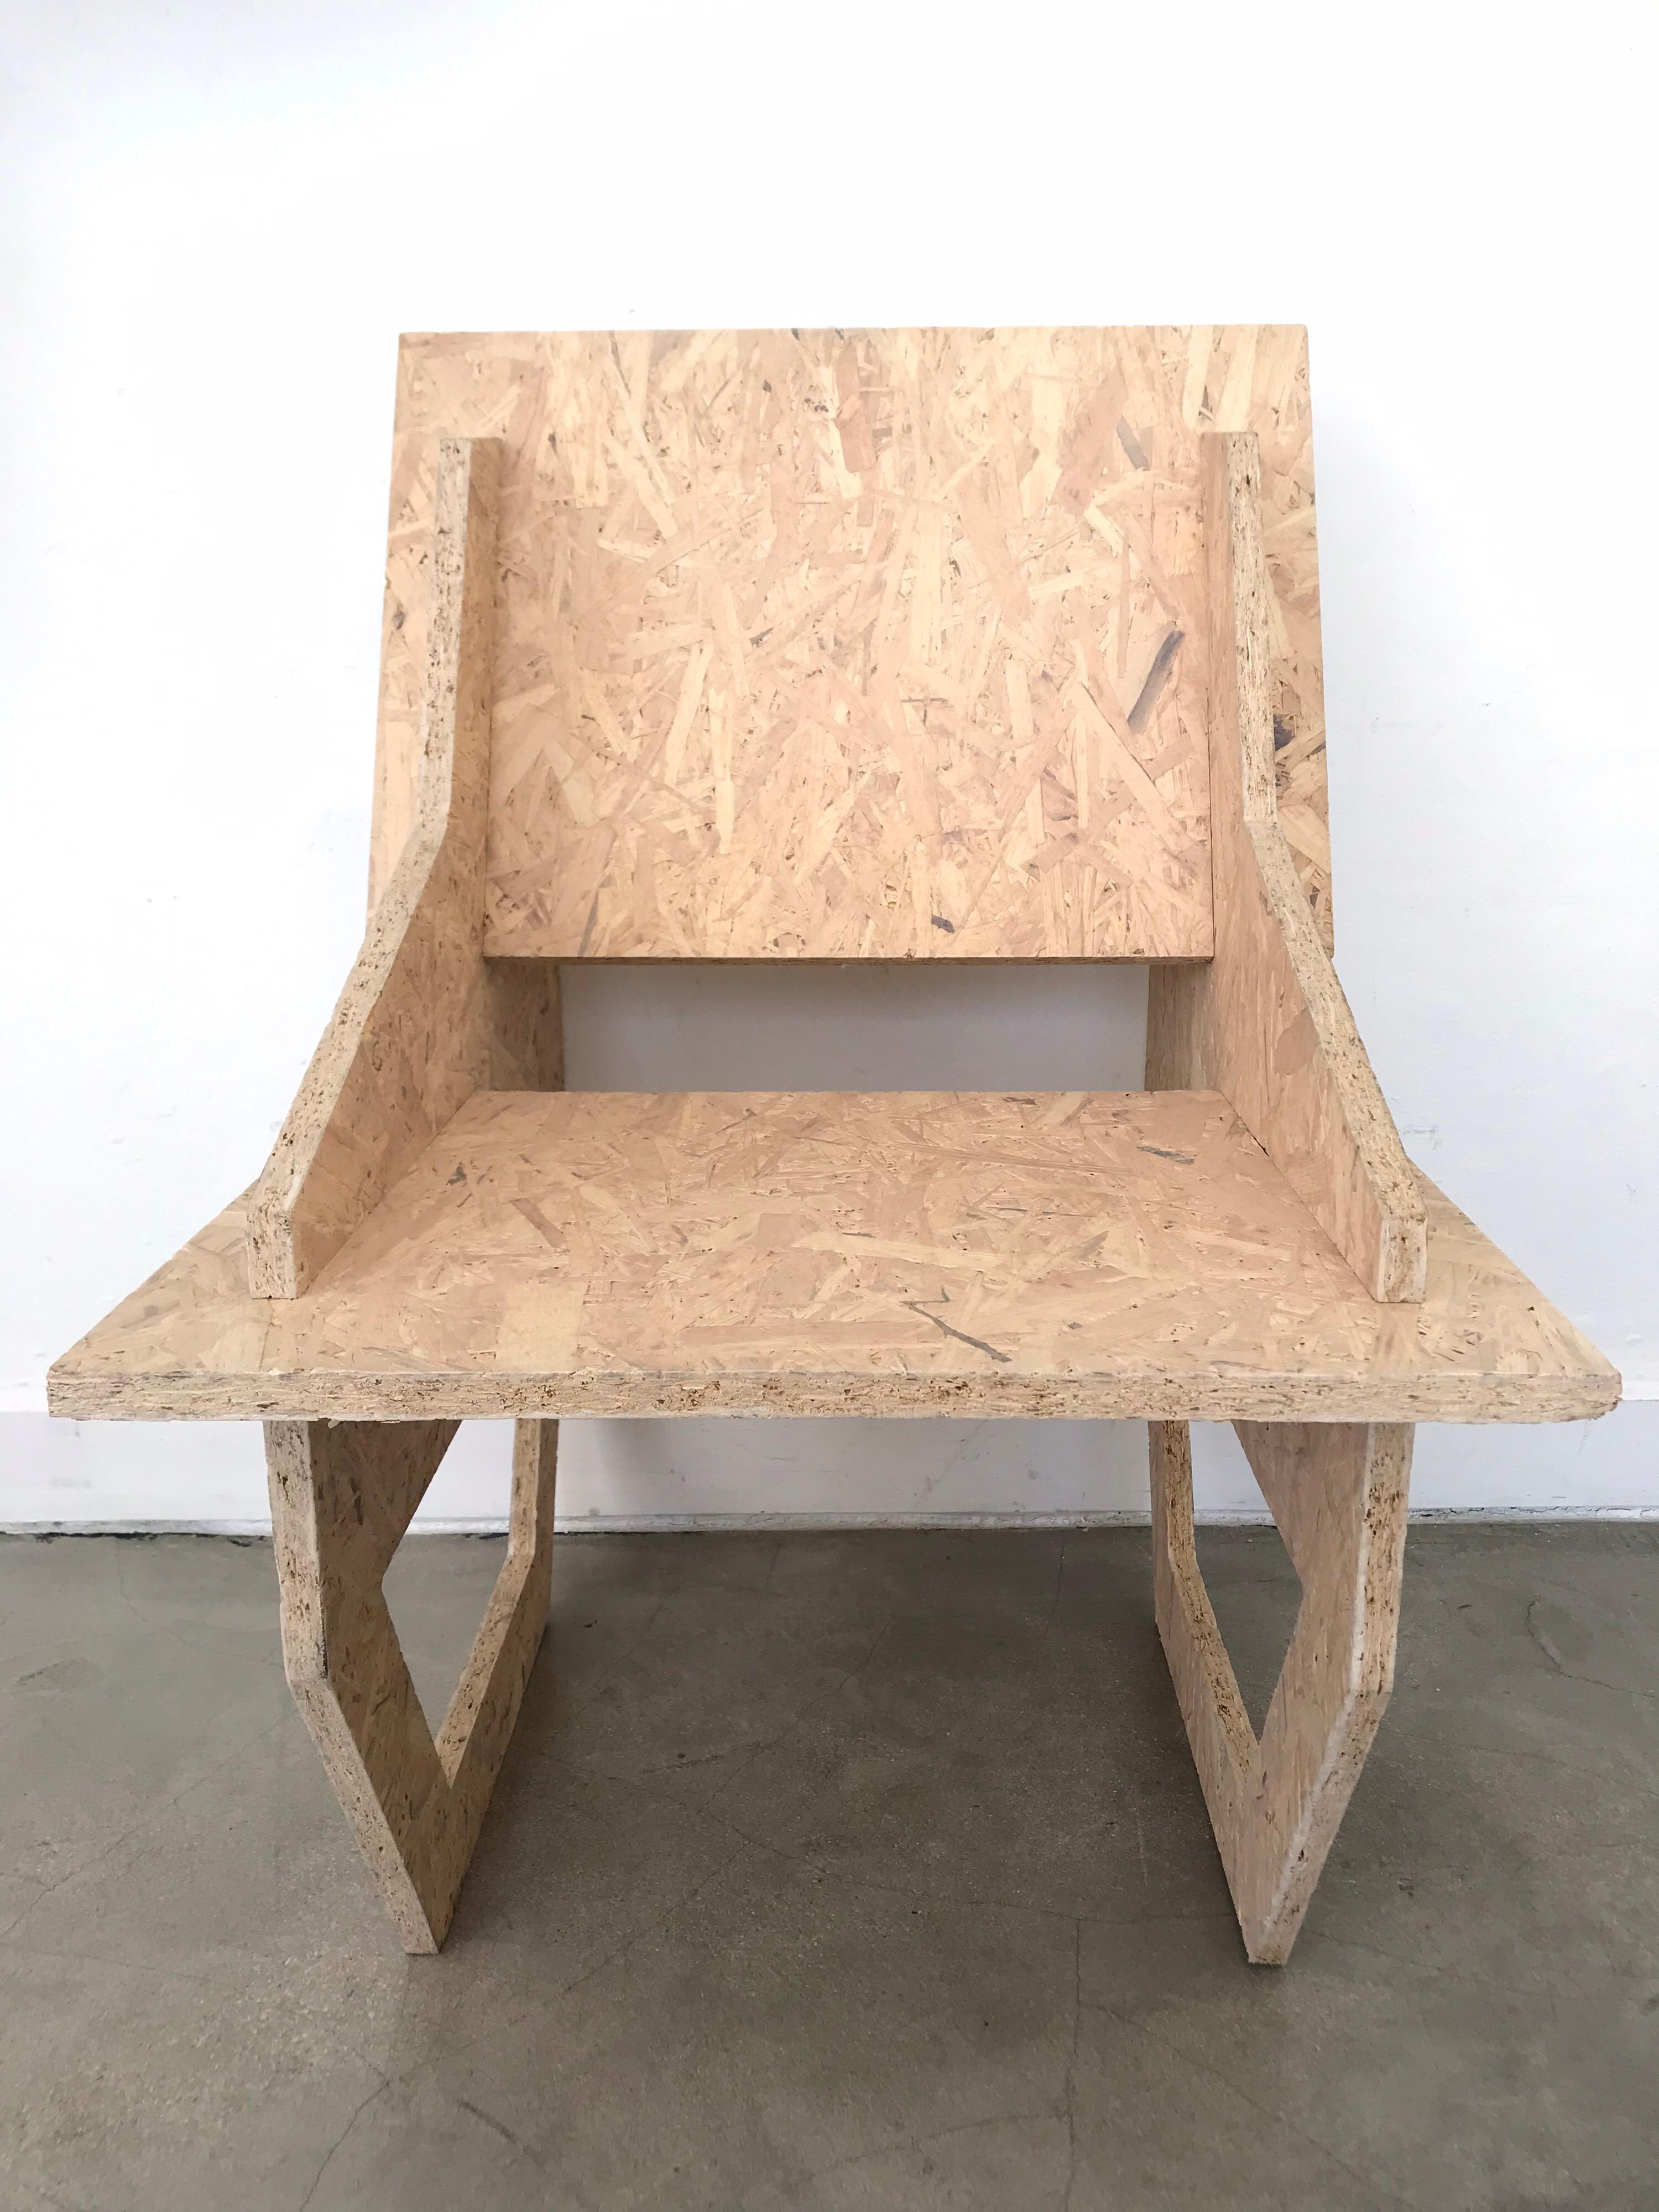 Constructivist style chair designed by Dominic Beattie, rendered in Lime waxed OSB, 2018.